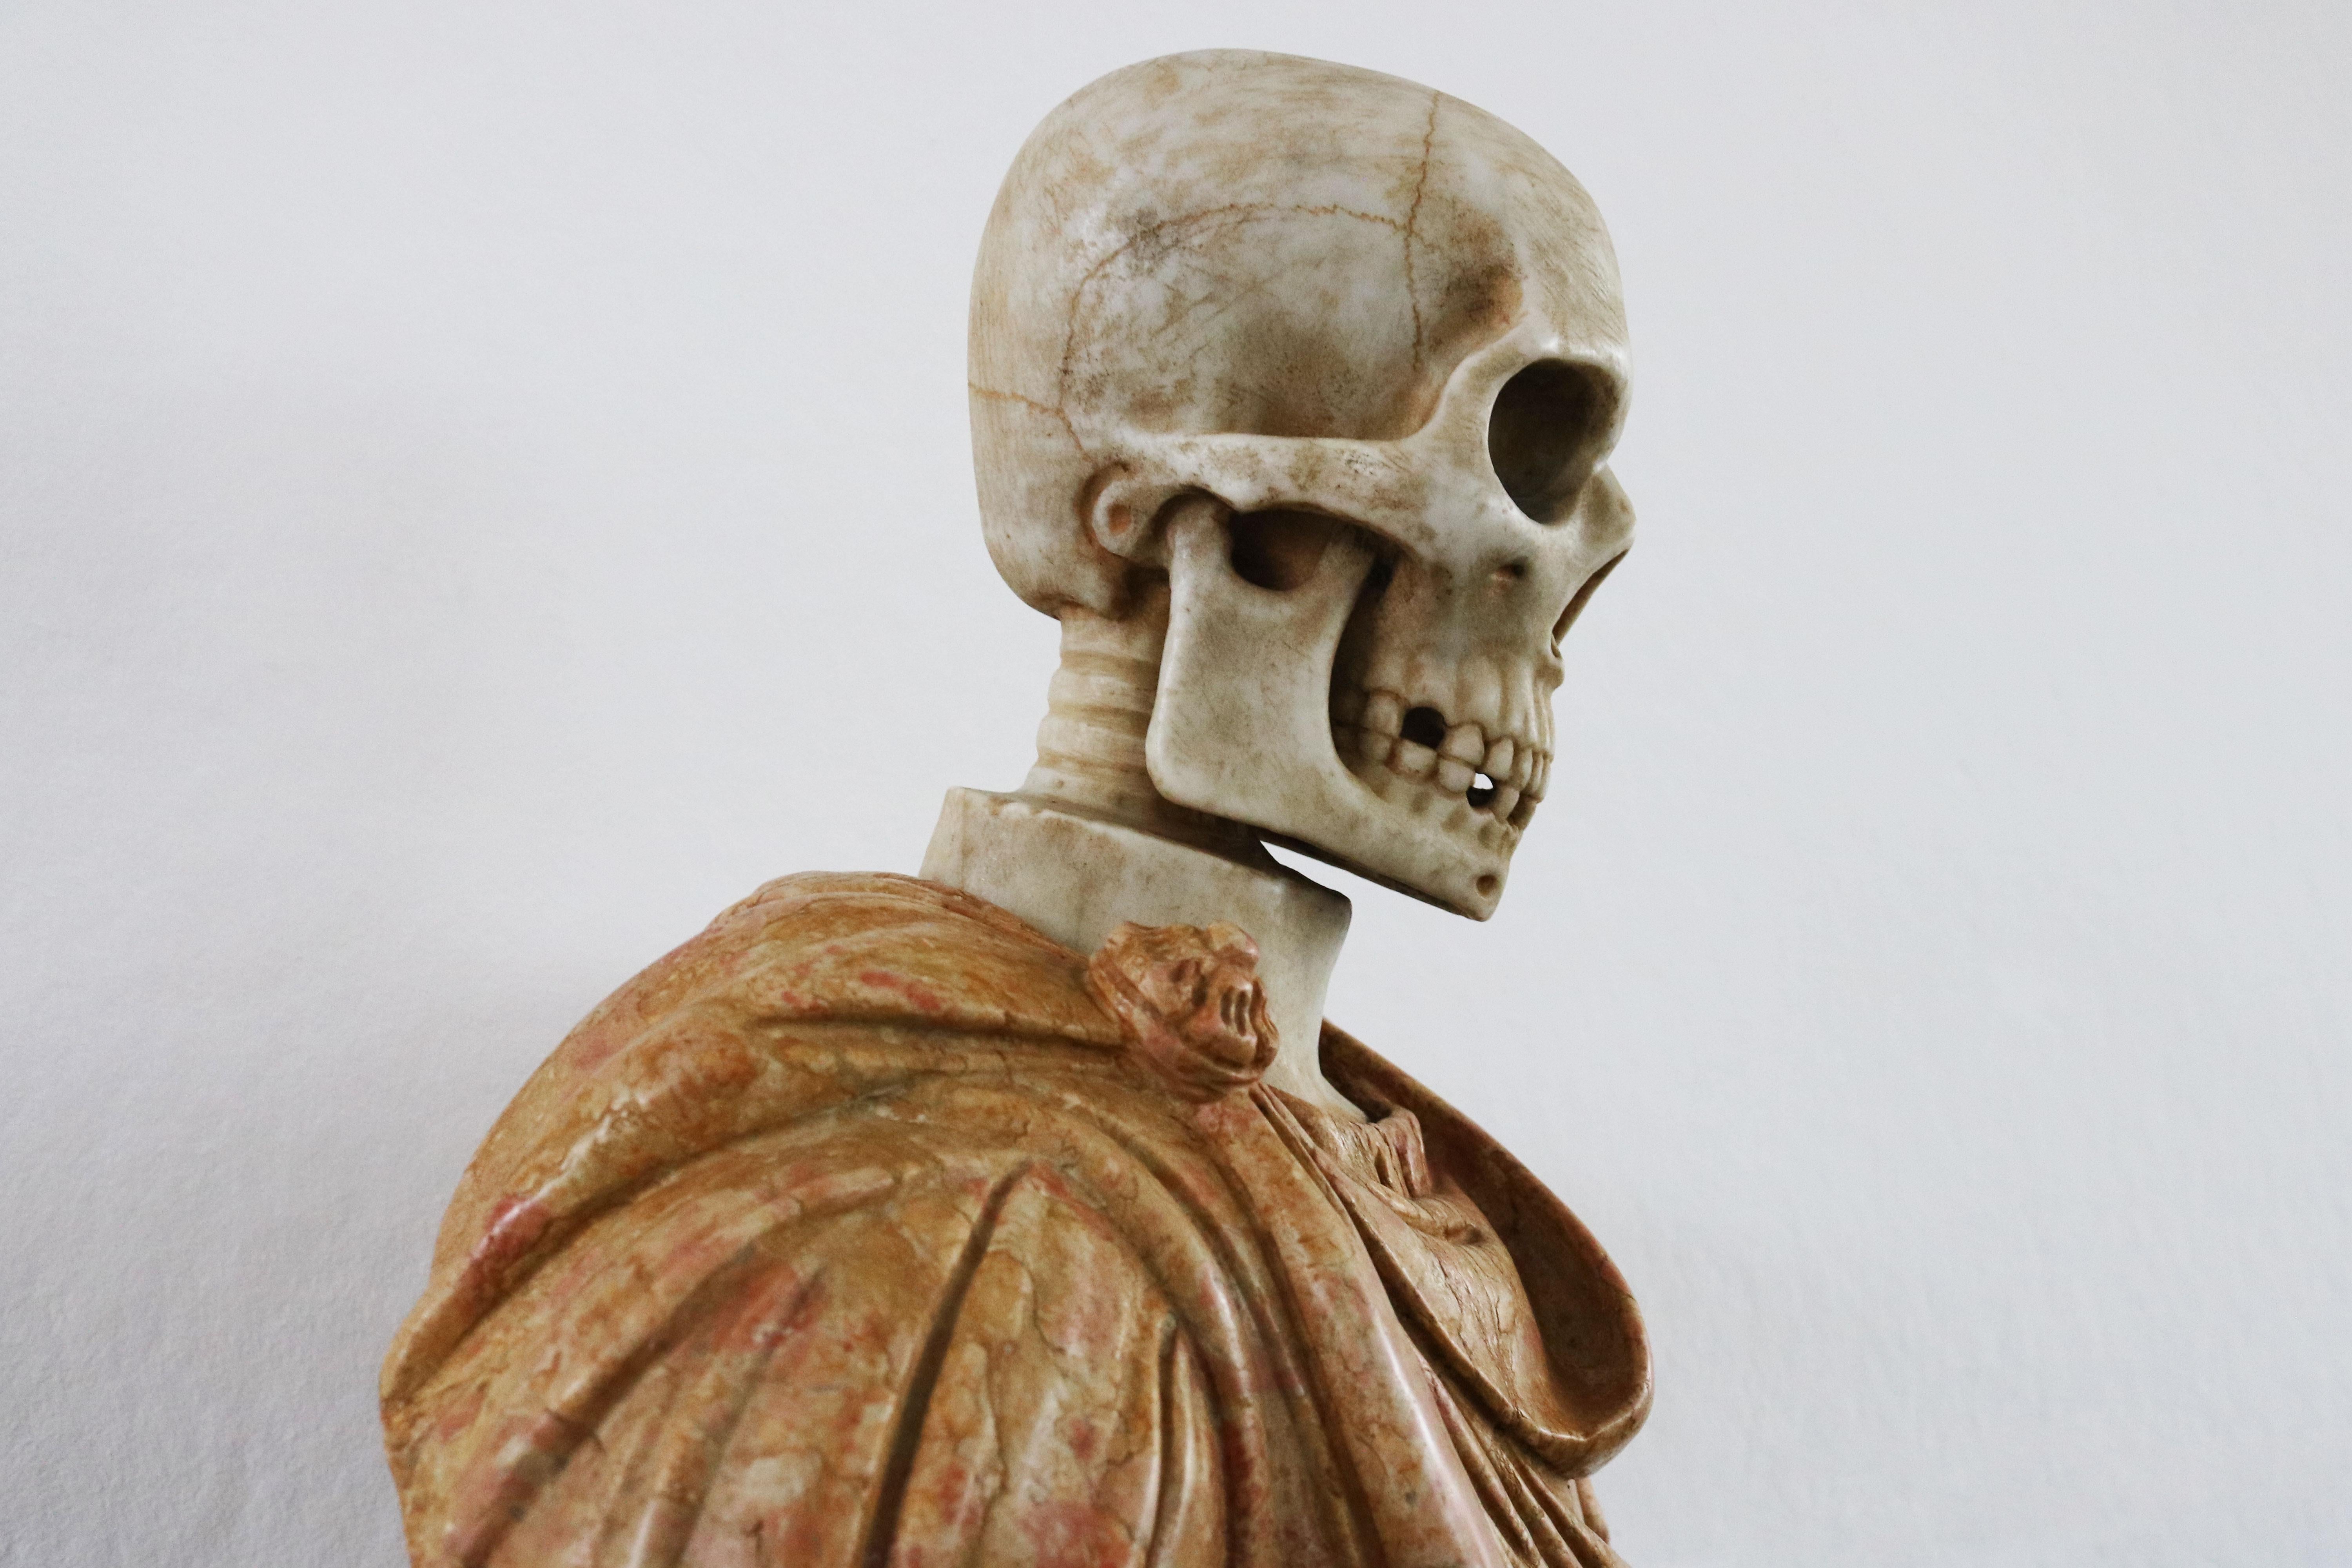 Italian Marble Bust Vanitas / Memento Mori 19th Century Carved Sculpture Italy For Sale 5